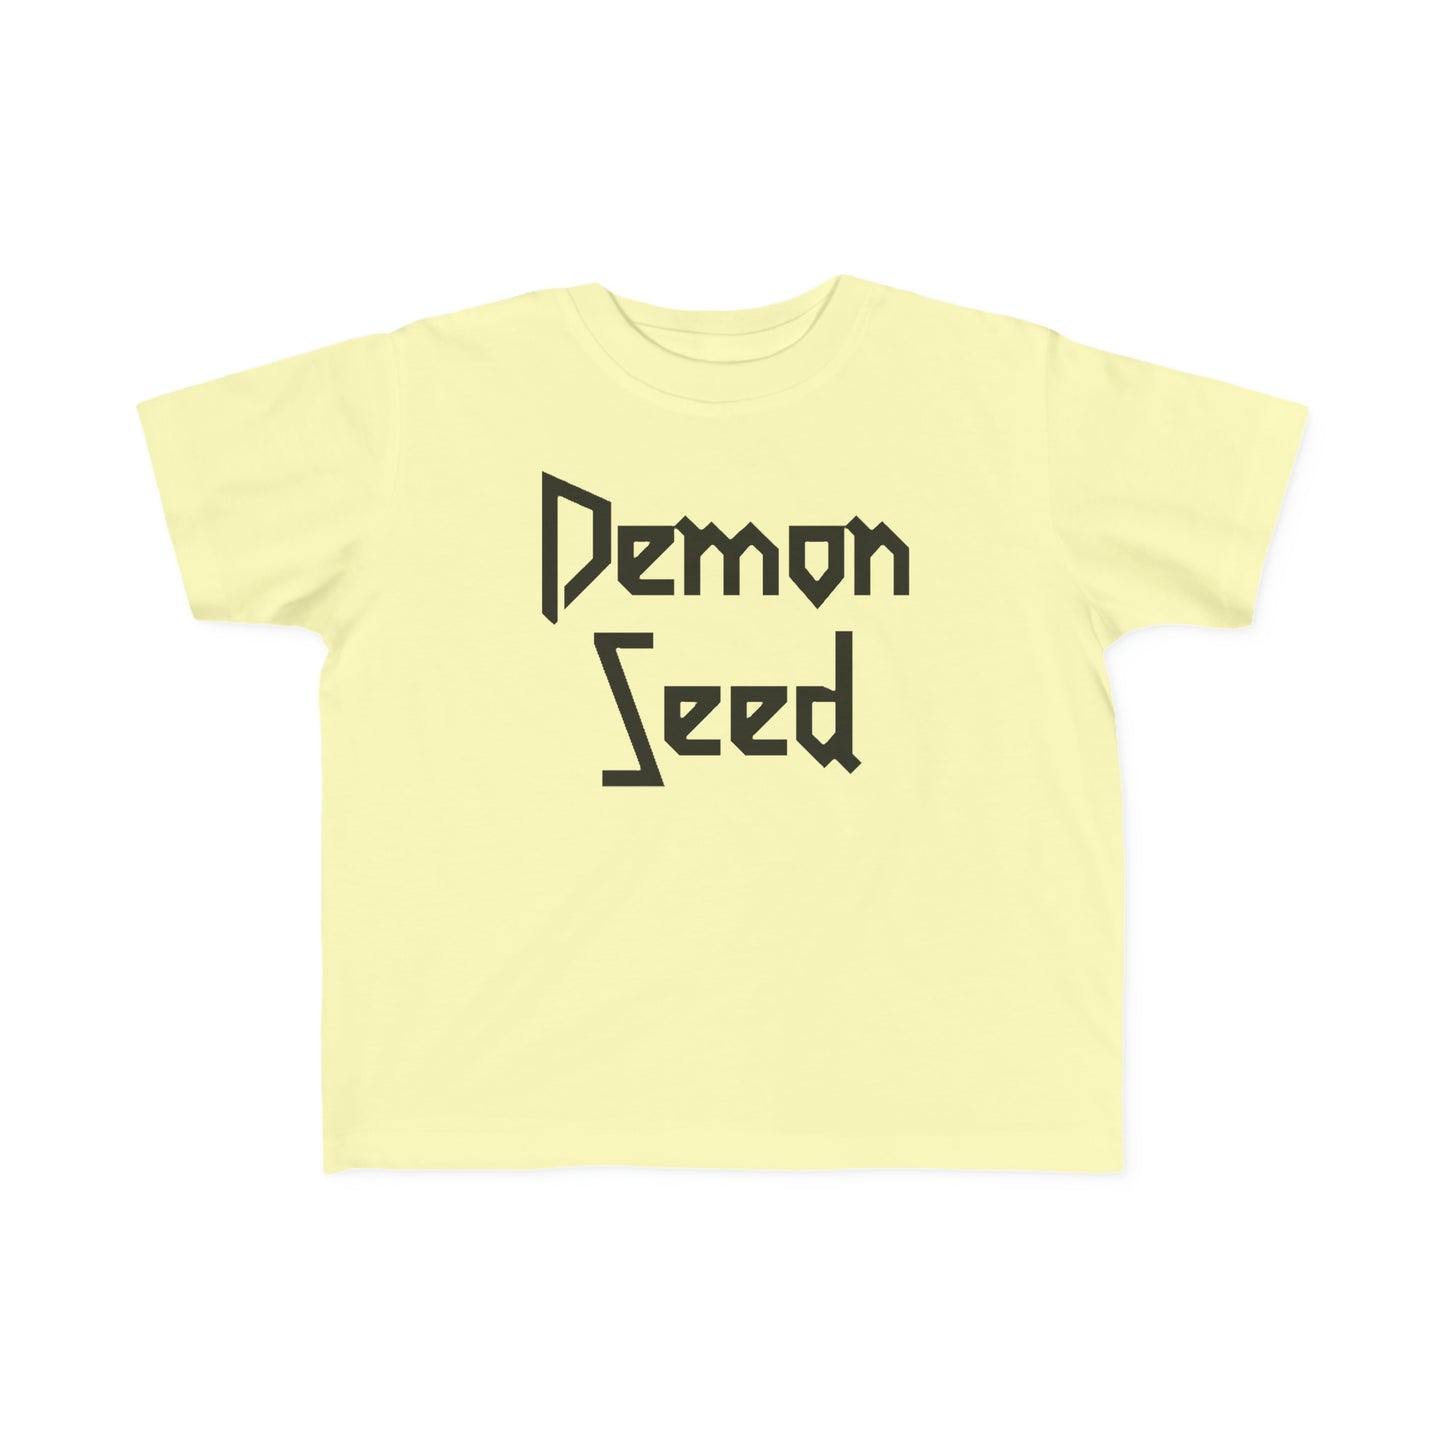 Demon Seed, Toddler T-Shirt, Rock and Roll T-Shirt for Your Little Demon Seed, Funny Rock T-Shirt, Gifts for Unruly Children, Gag Gift